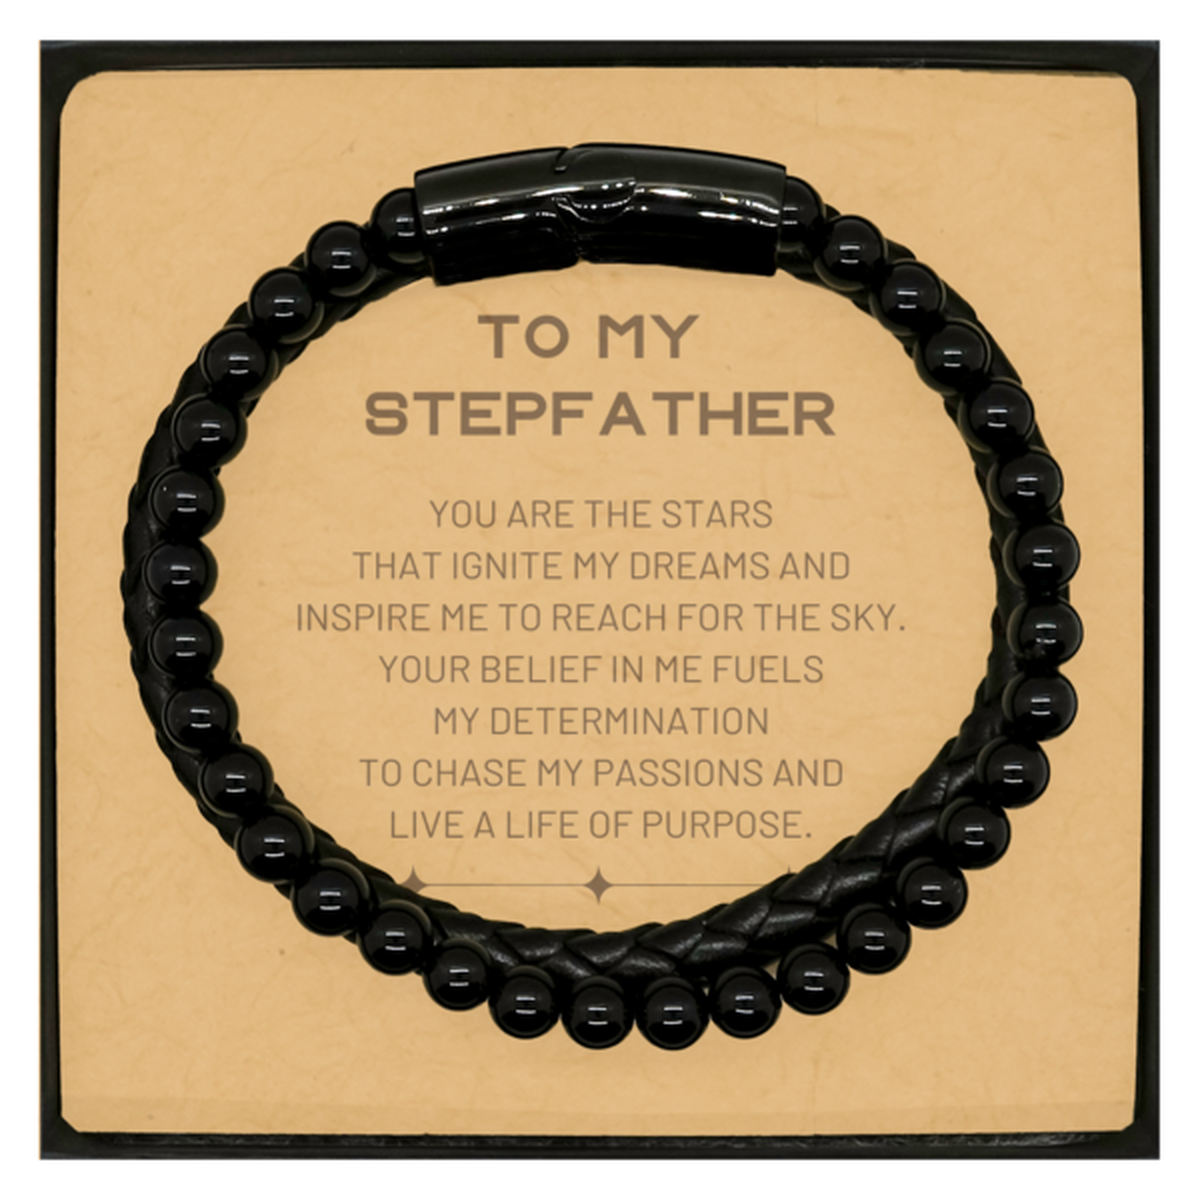 To My Stepfather Stone Leather Bracelets, You are the stars that ignite my dreams and inspire me to reach for the sky, Birthday Christmas Unique Gifts For Stepfather, Thank You Gifts For Stepfather